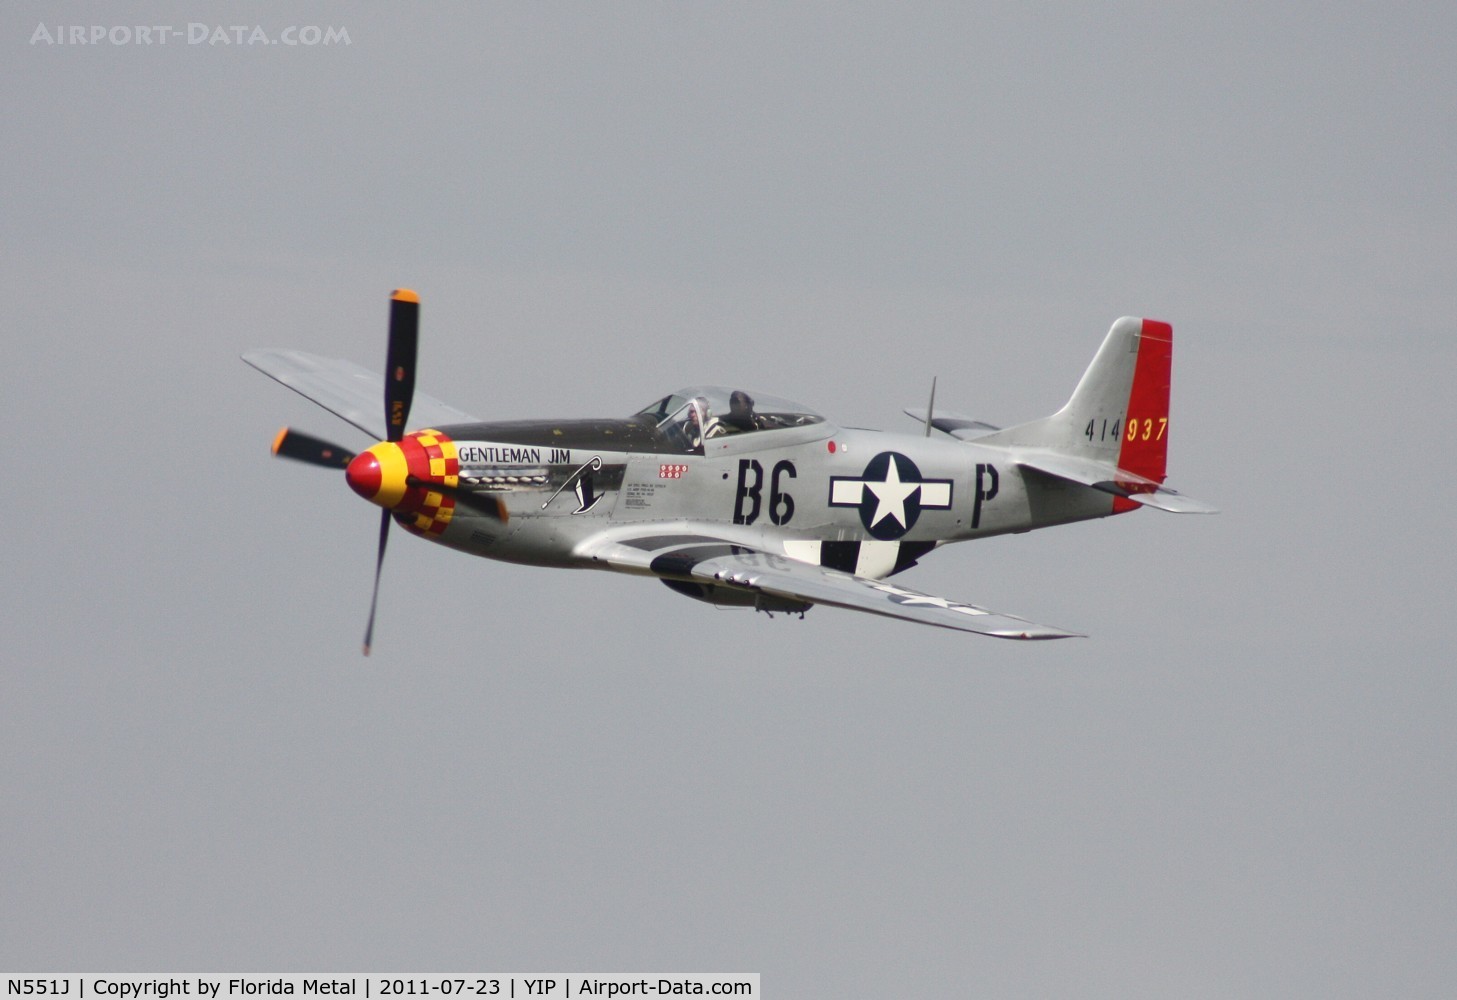 N551J, 1957 North American P-51D Mustang C/N 44-74230, Gentleman Jim flown by Jimmy Leeward.  Unfortunately, on Sept 16 at Reno, Jimmy Leeward was involved in a fatal crash involving modified P-51 Mustang Galloping Ghost